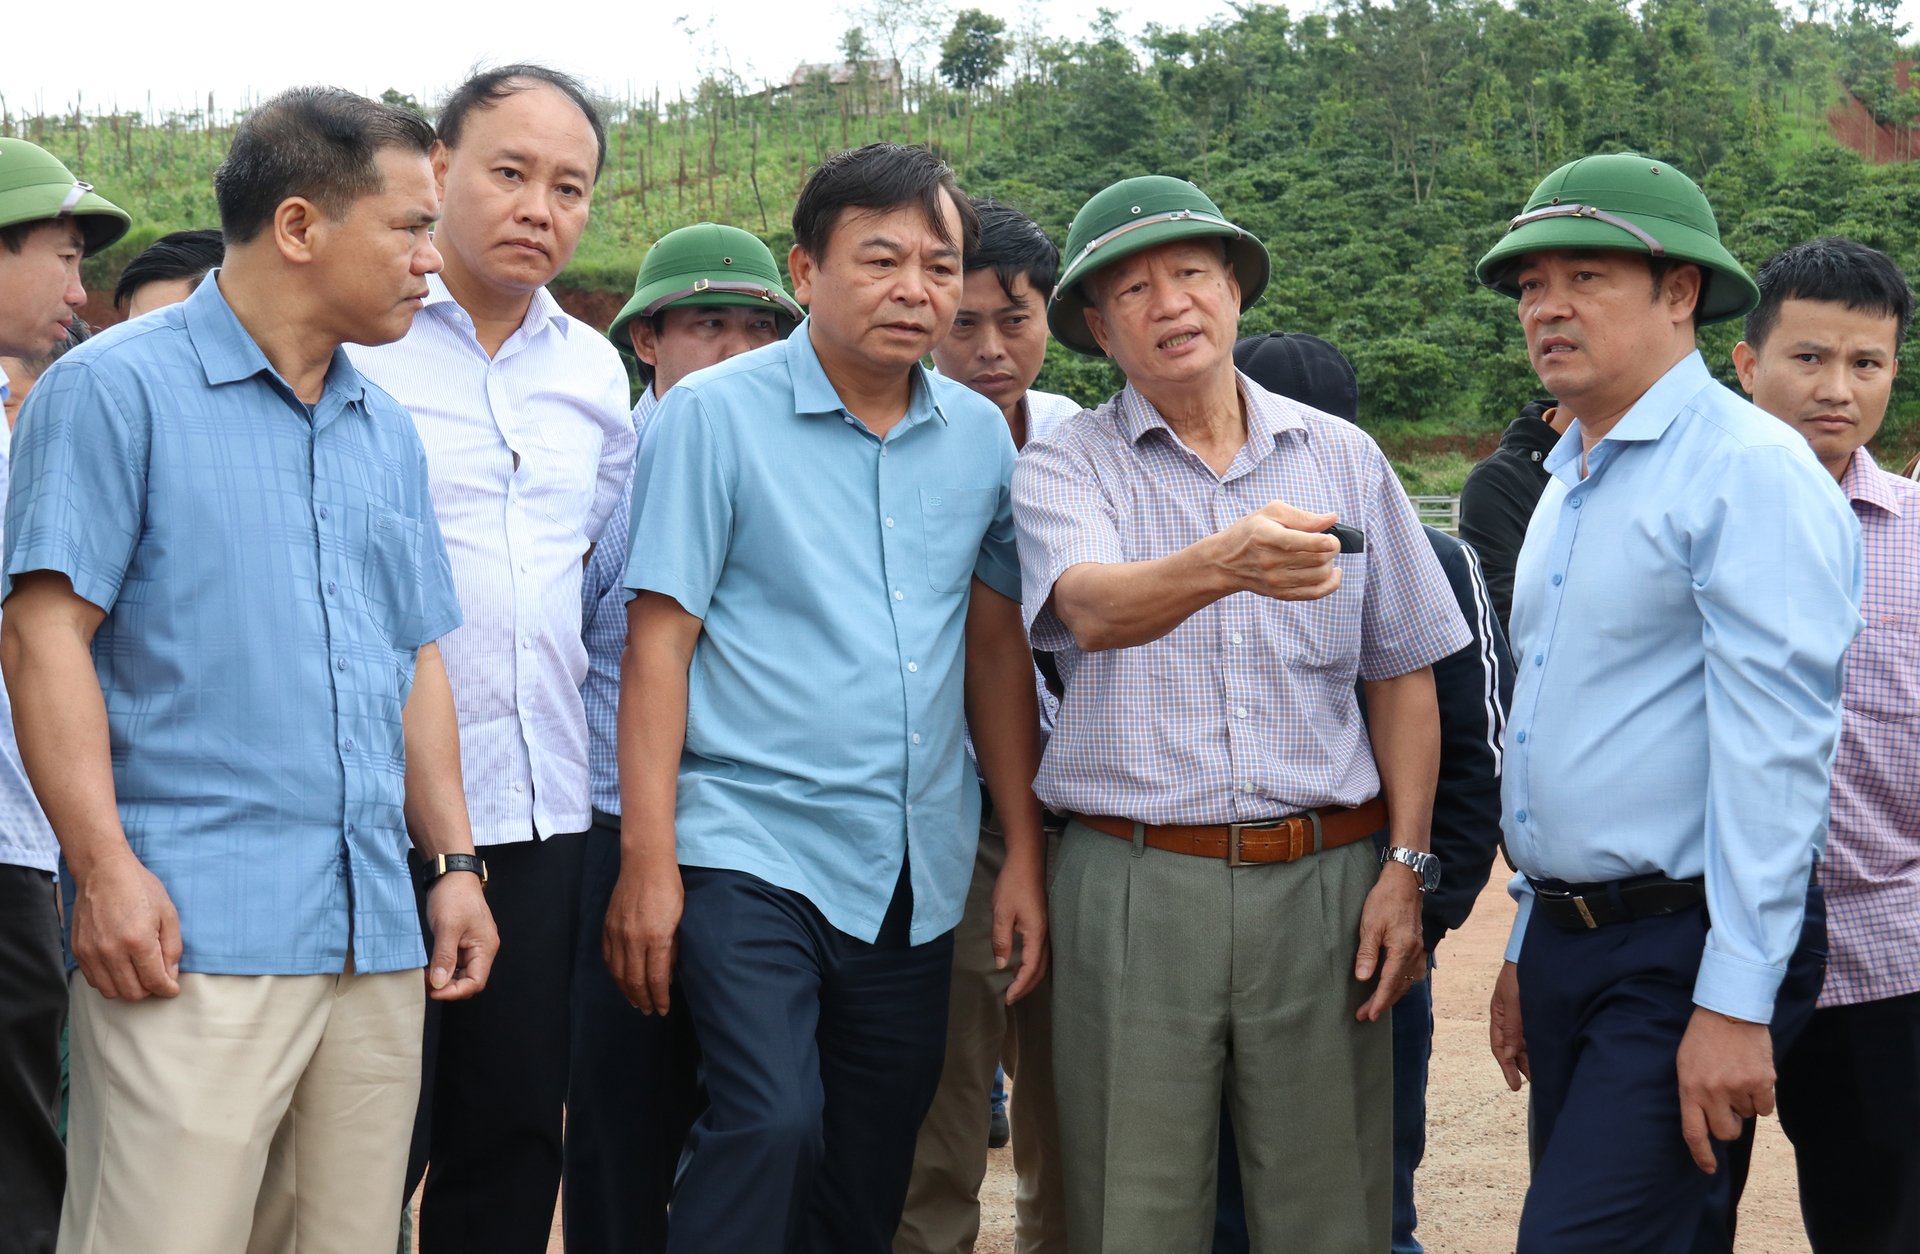 Deputy Minister Nguyen Hoang Hiep and the delegation inspect the incident at the Dak N'ting irrigation project. Photo: Quang Yen.